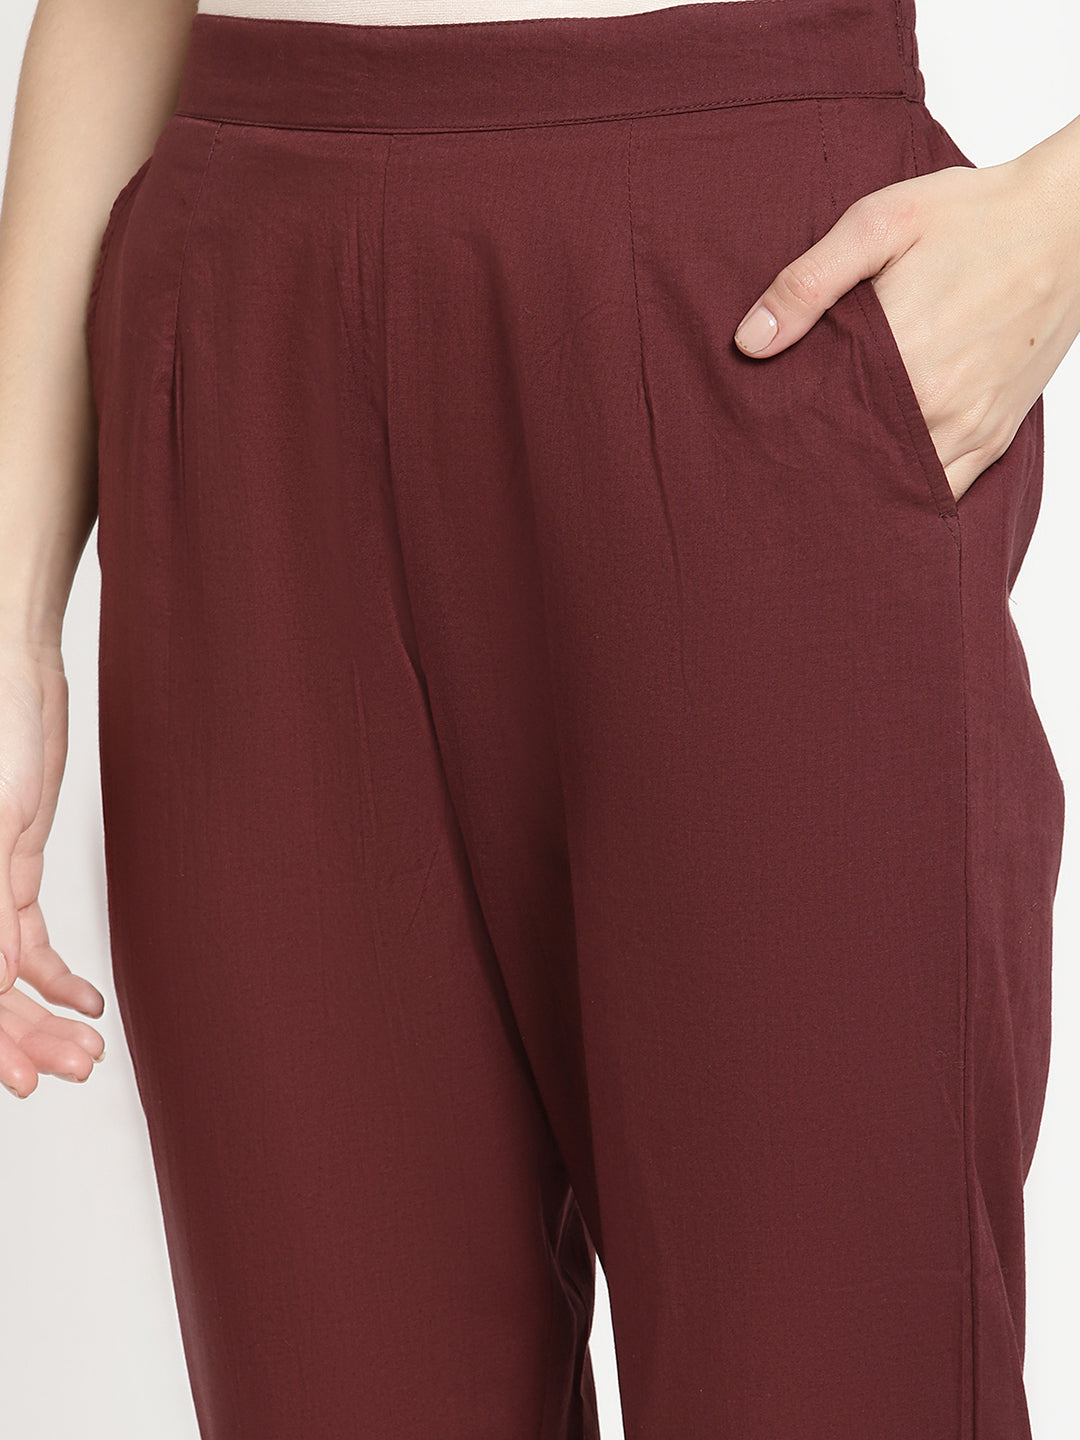 Model wearing straight-fit maroon cotton pants. 